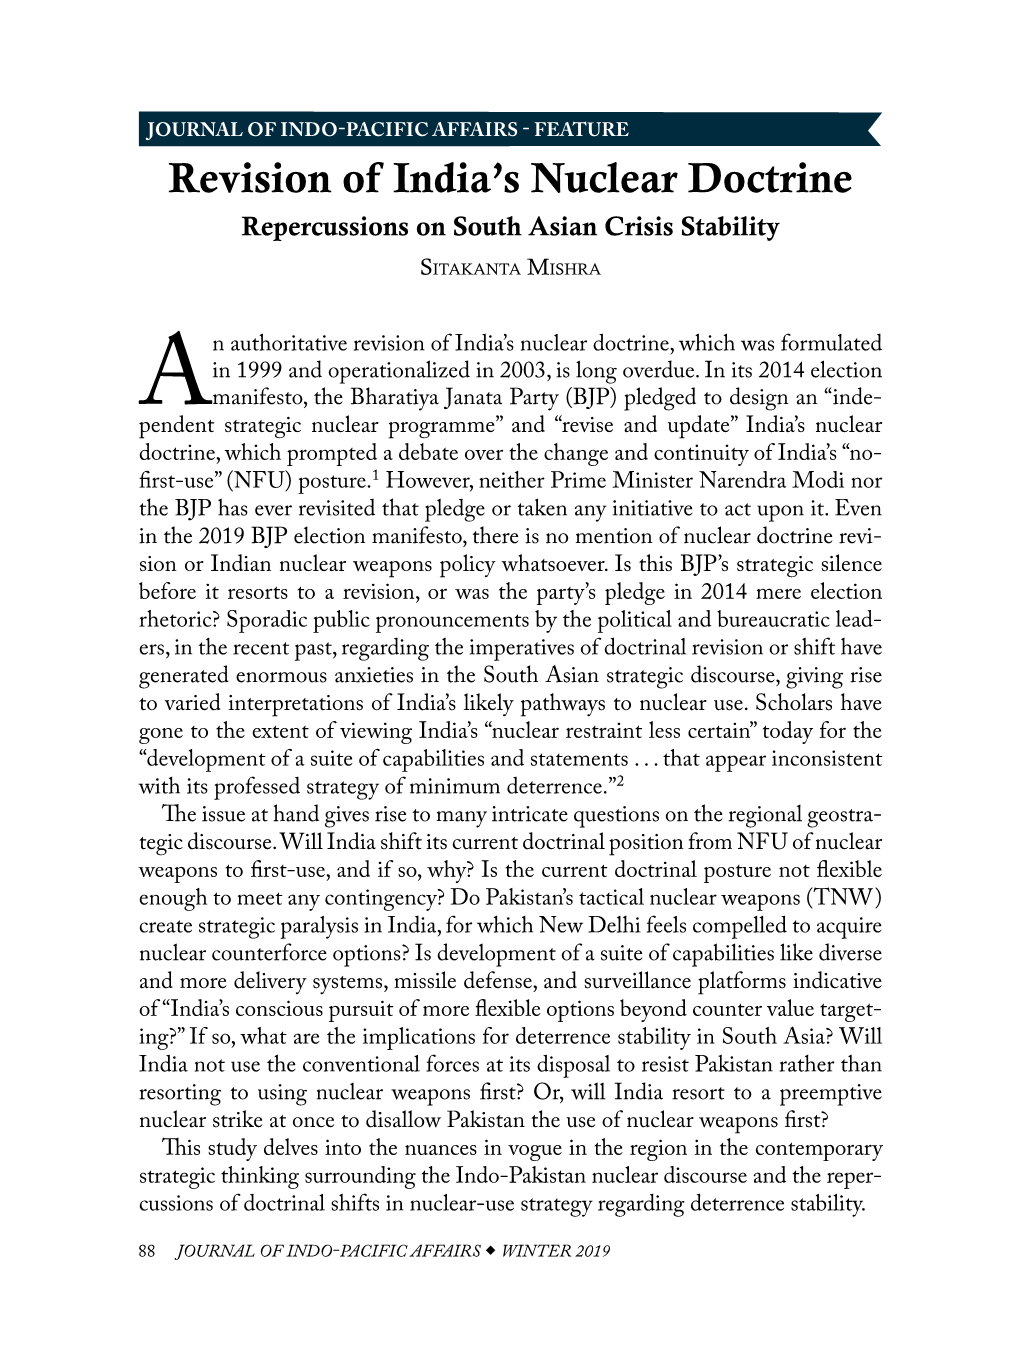 Revision of India's Nuclear Doctrine